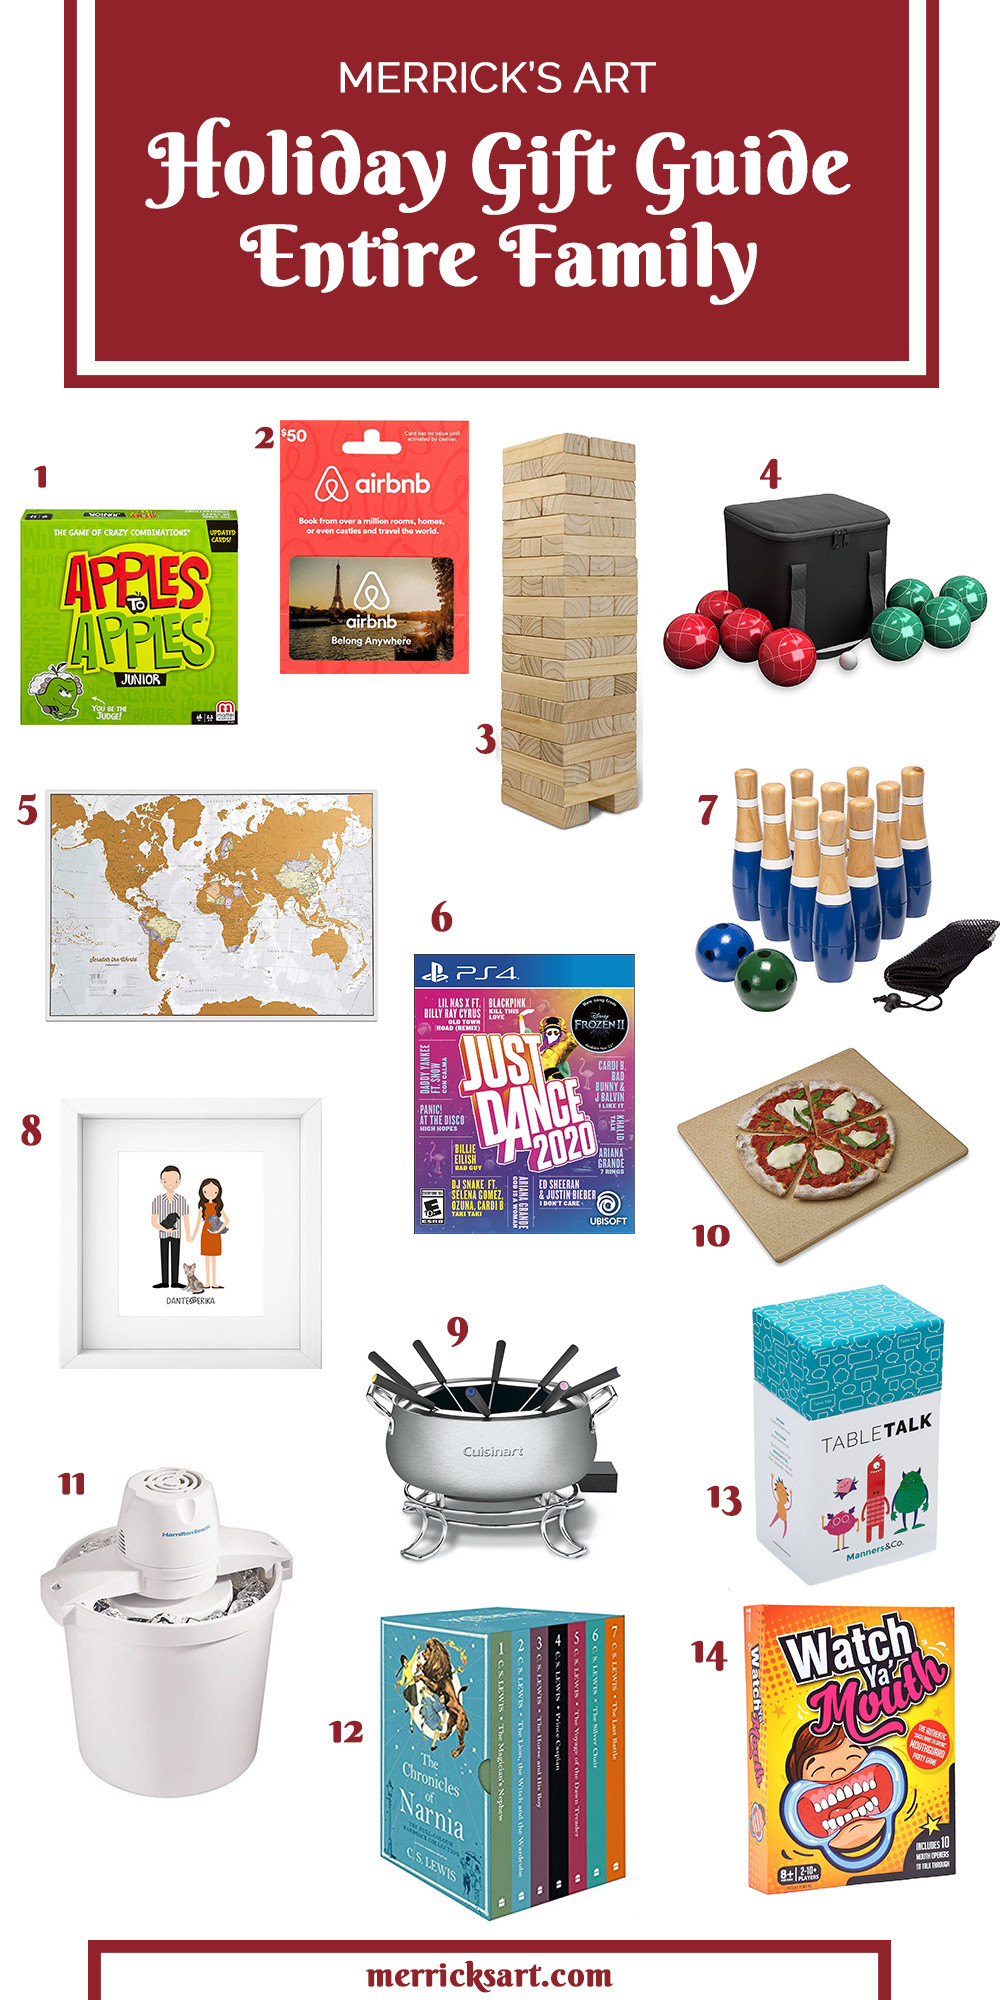 Christmas Gift Ideas For Families
 Family Christmas Gifts Ideas for an Entire Family